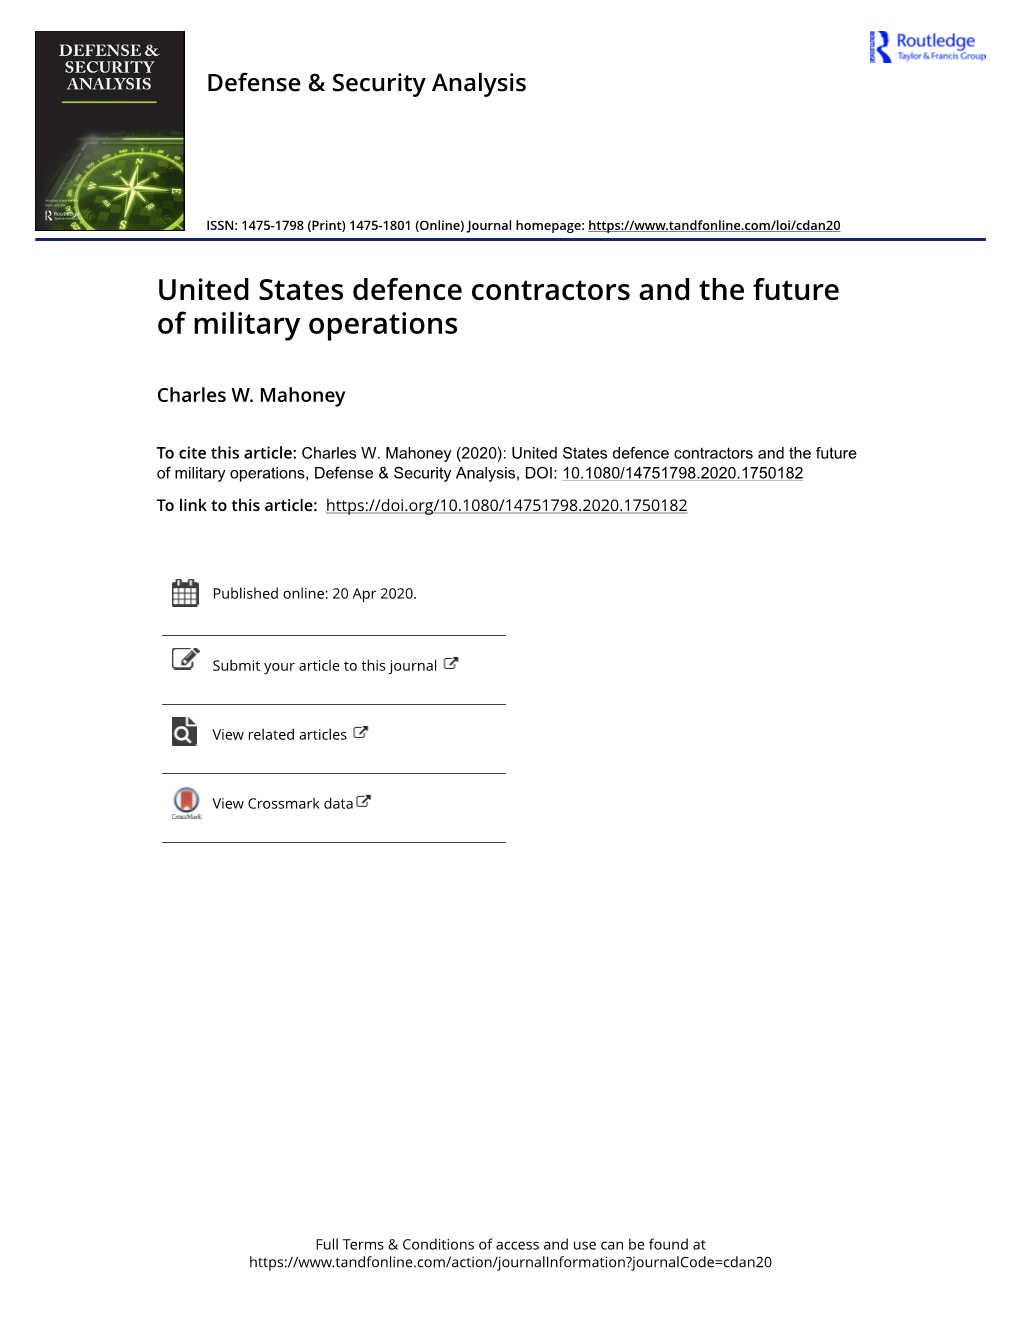 United States Defence Contractors and the Future of Military Operations